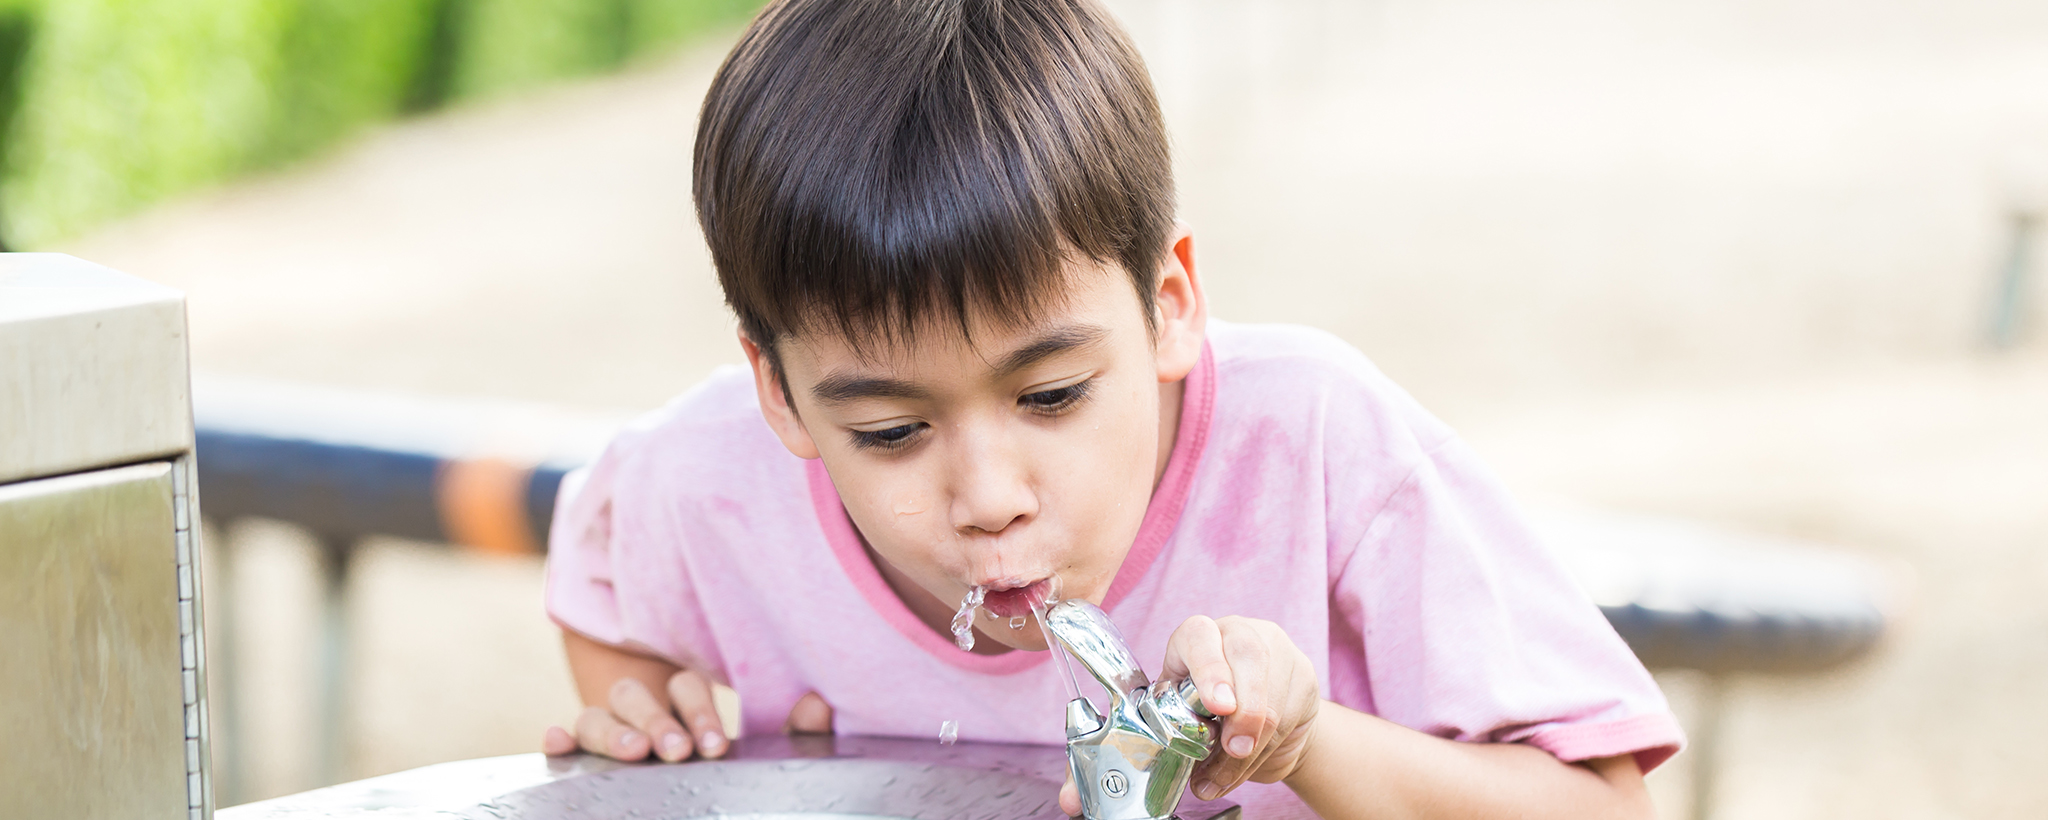 A boy in a pink shirt drinking from a water fountain outside